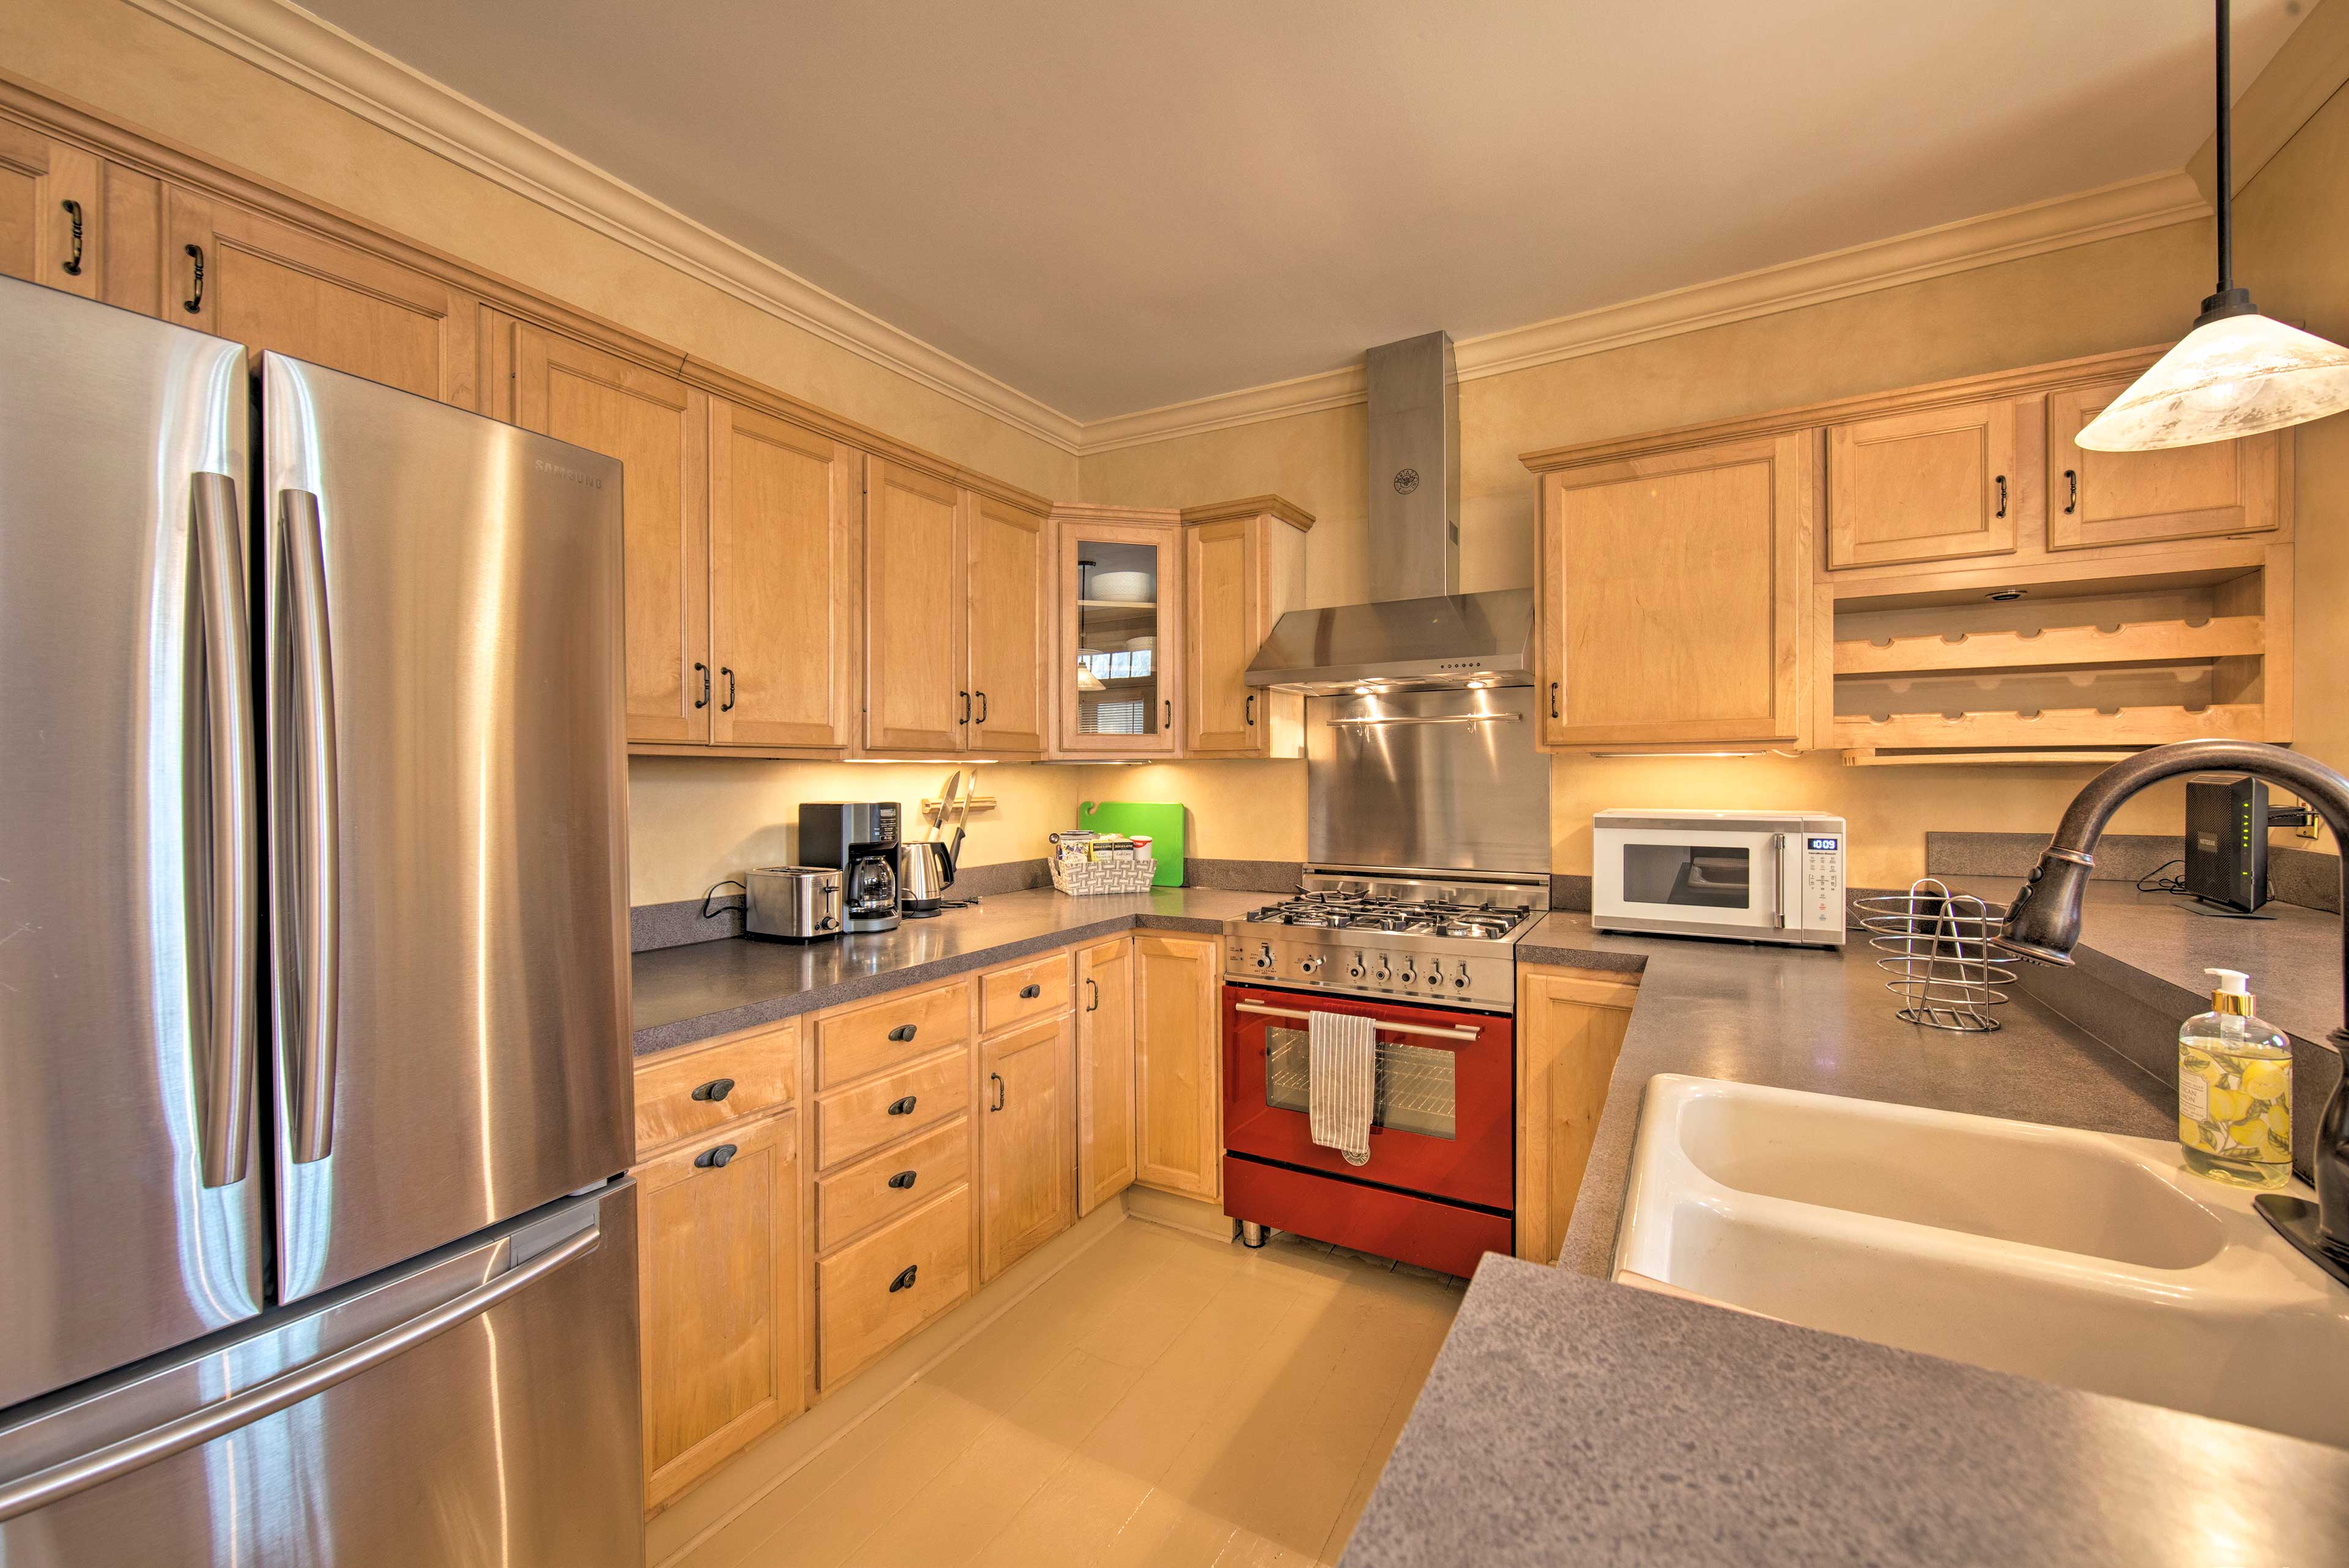 Kitchen | 1st Floor | Fully Equipped | Cooking Basics | Coffee Maker | Toaster